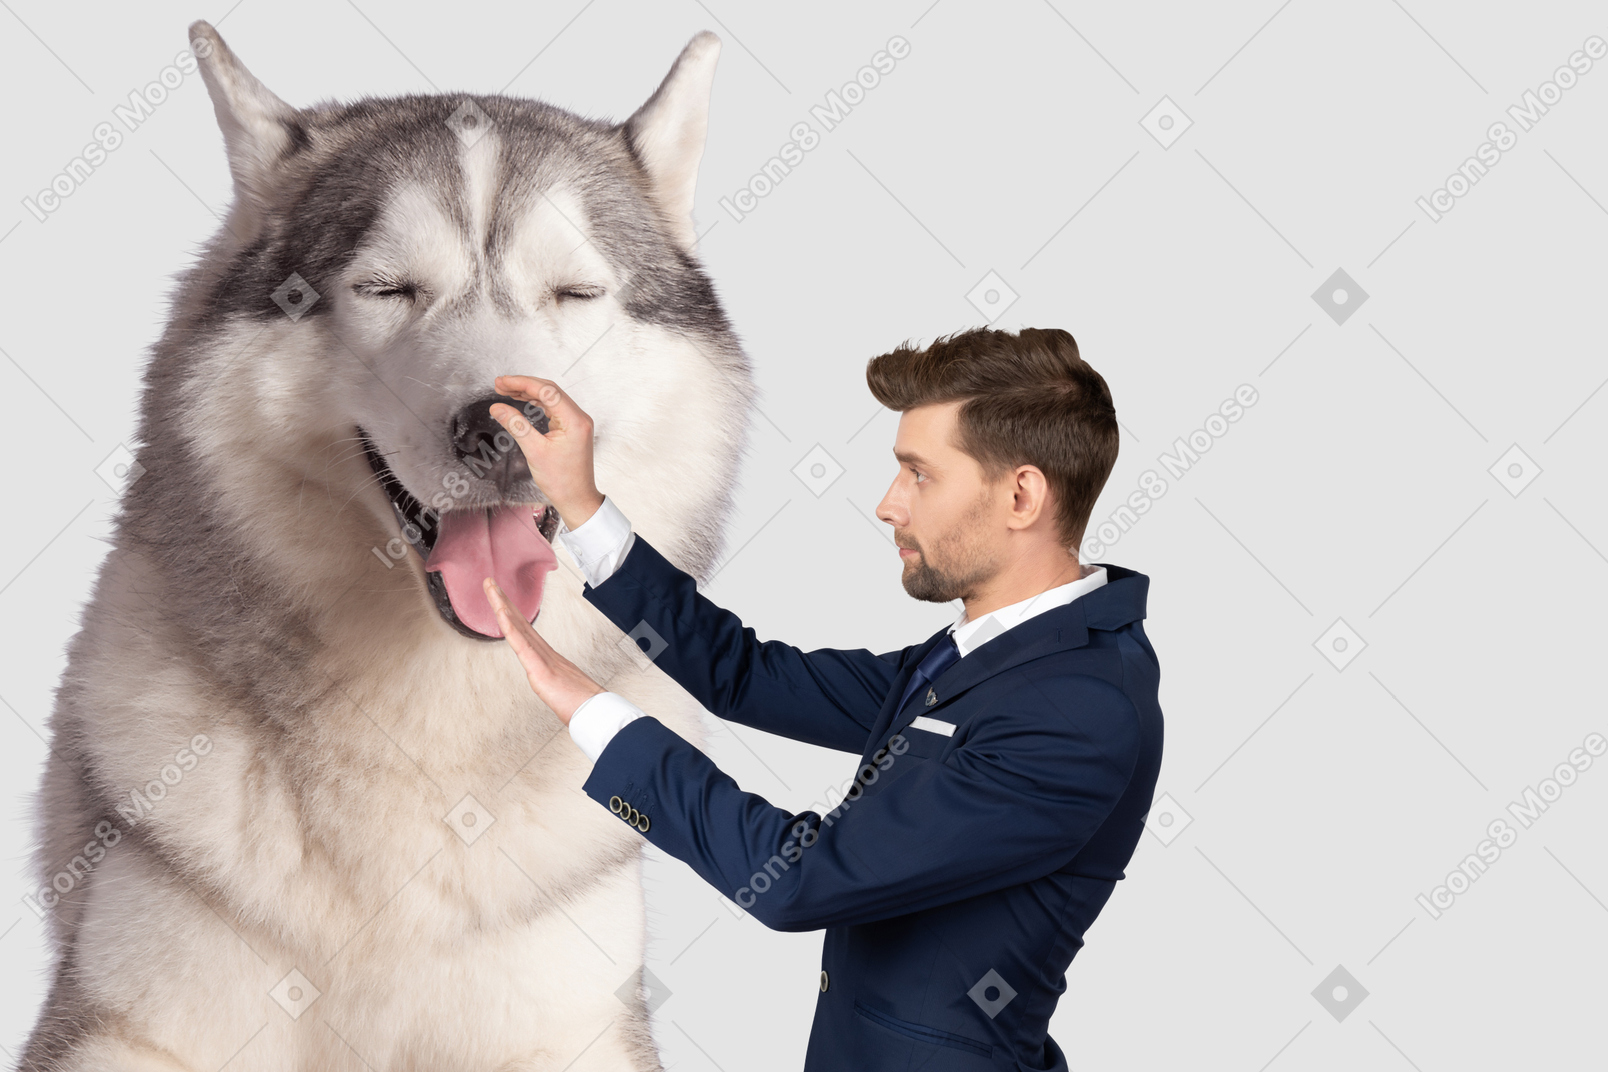 Man touching the nose of a giant dog